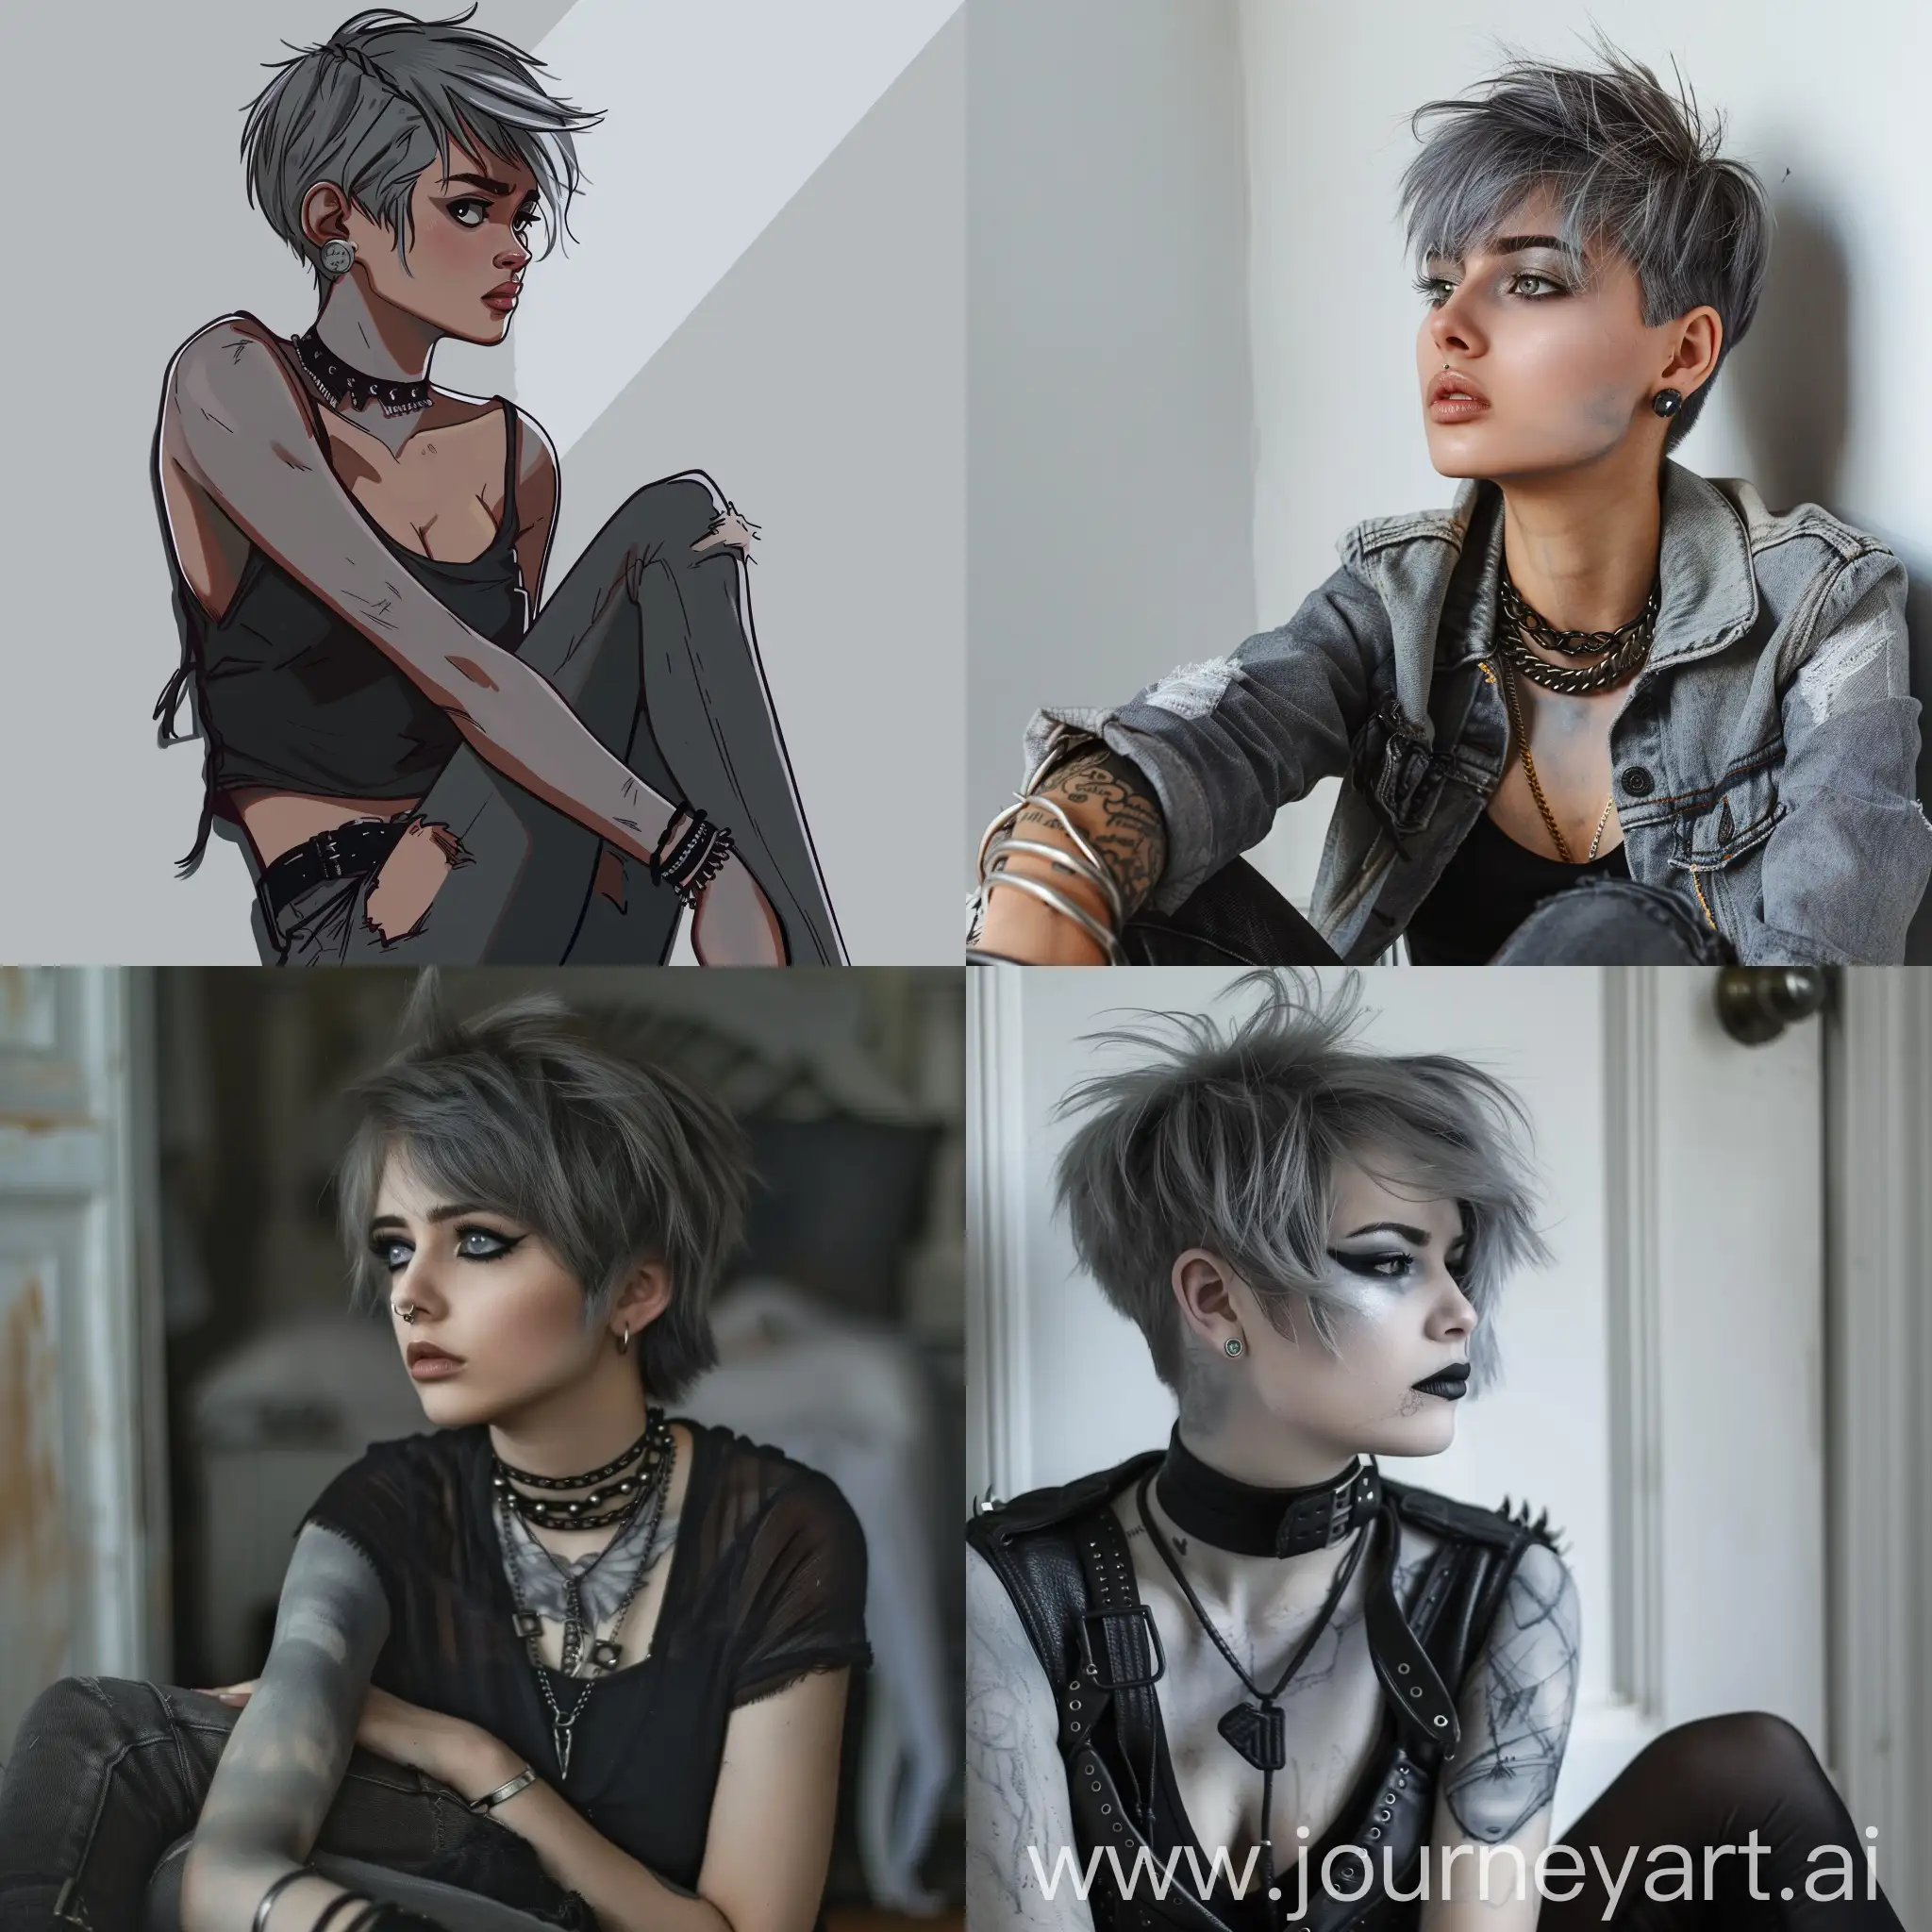 Contemplative-GraySkinned-Punk-Girl-with-Short-Gray-Hair